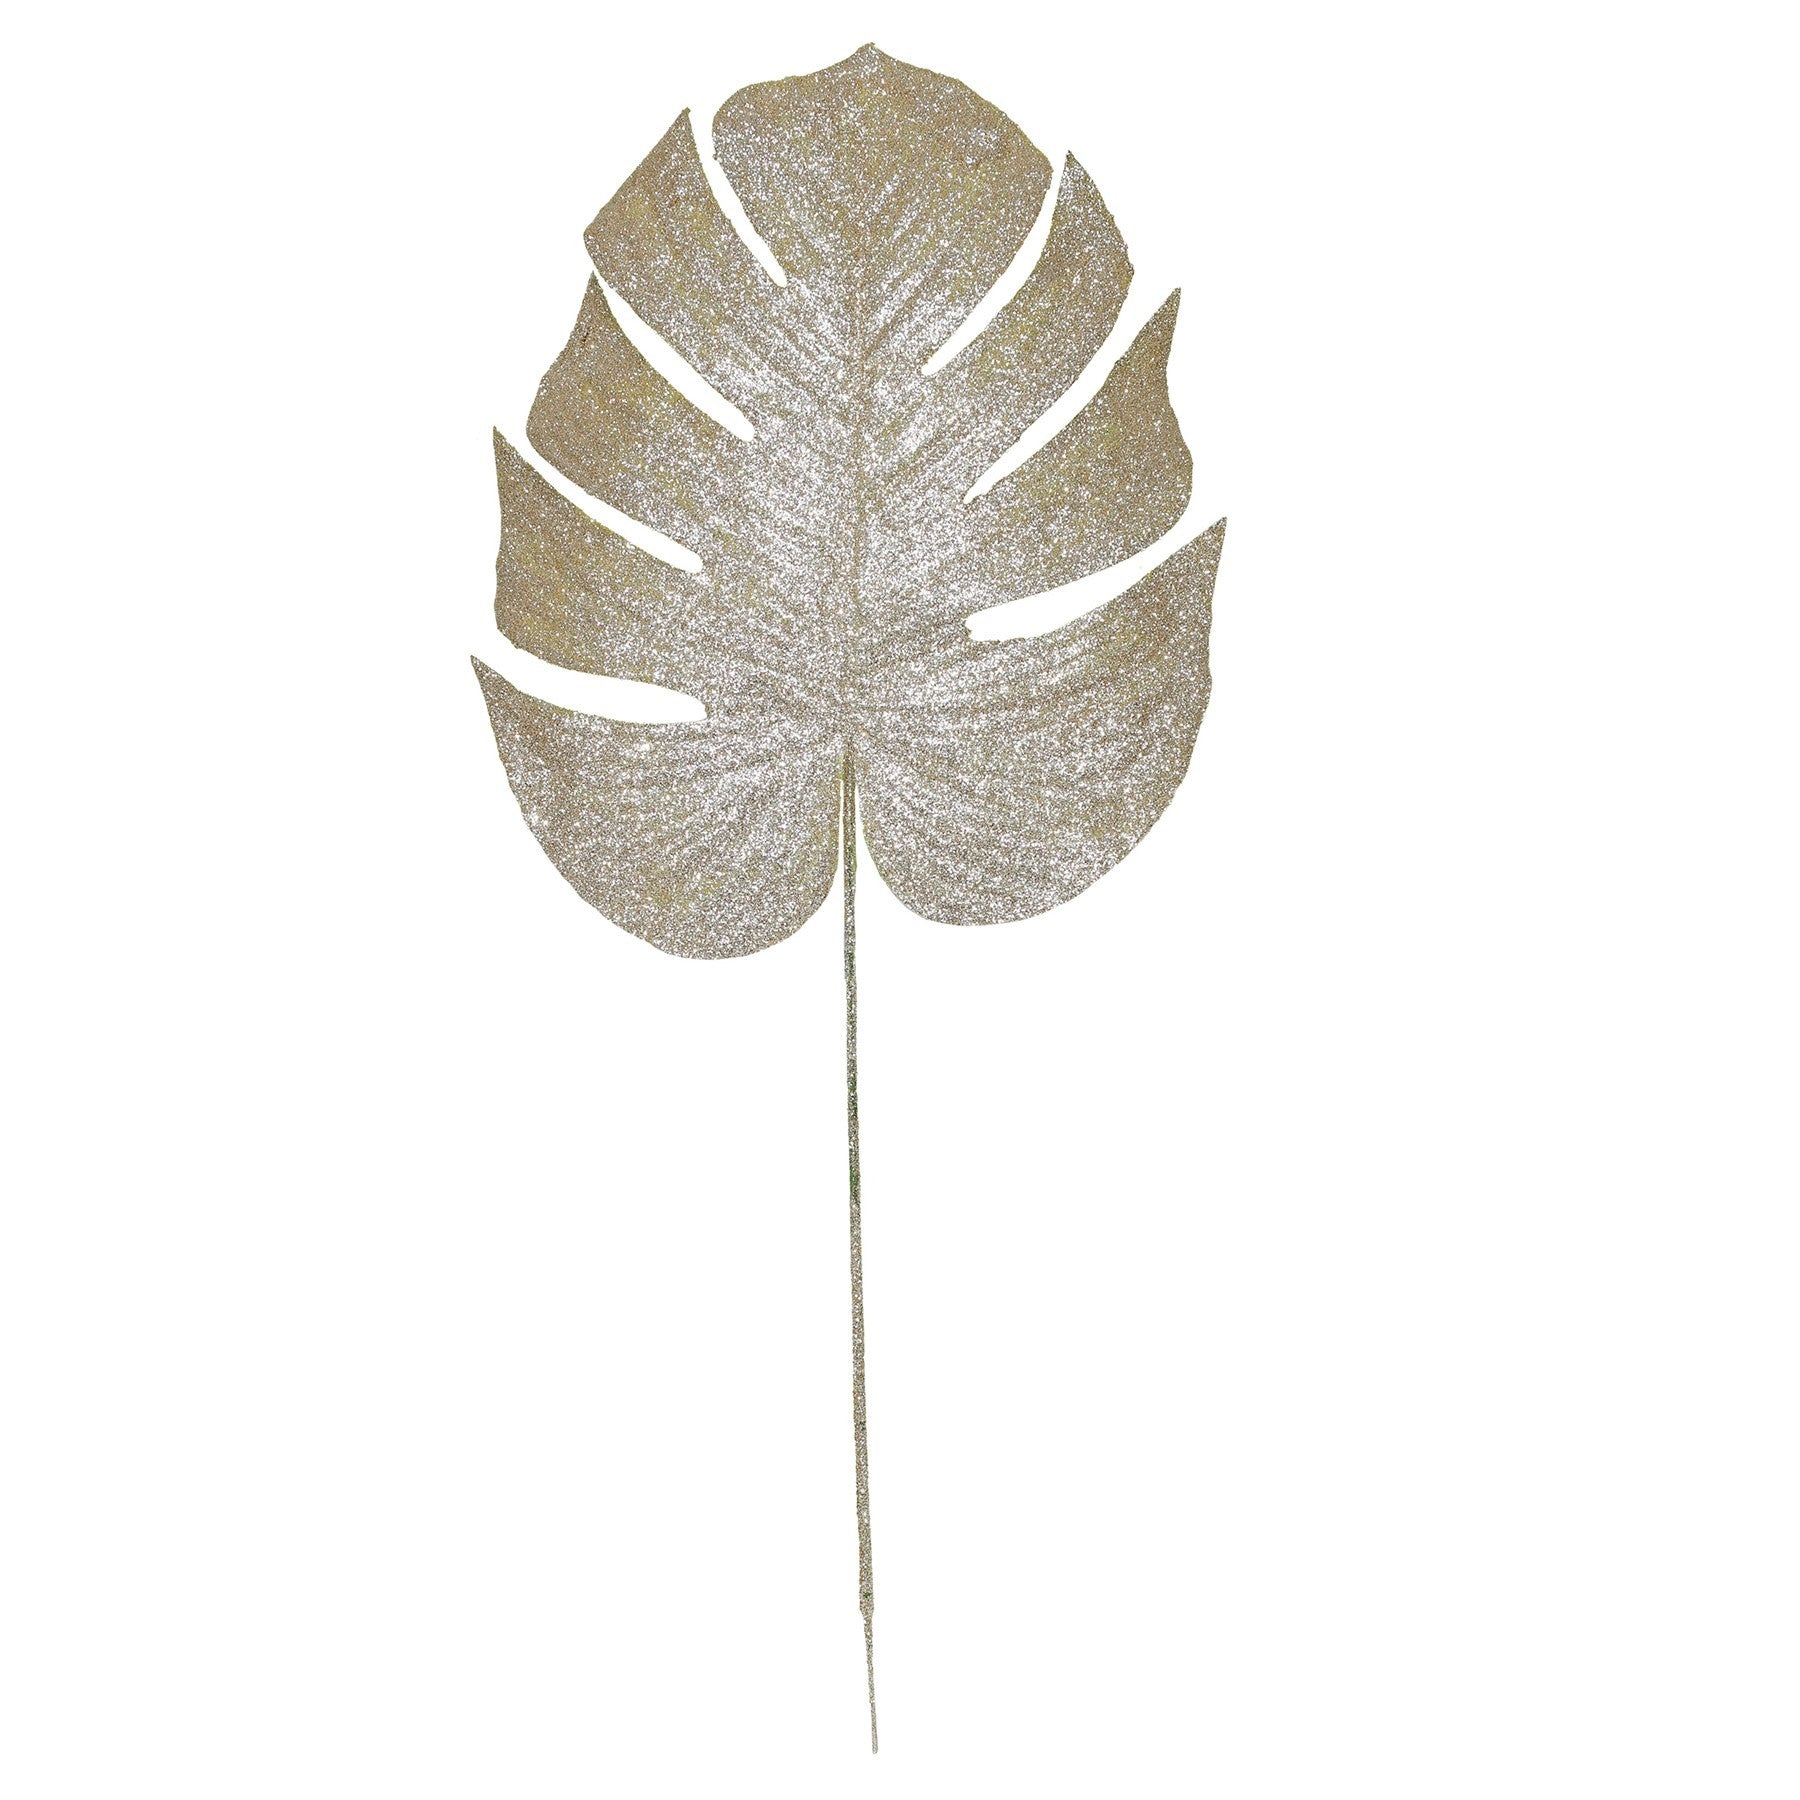 View Champagne Glitter Monstera Leaf Large information